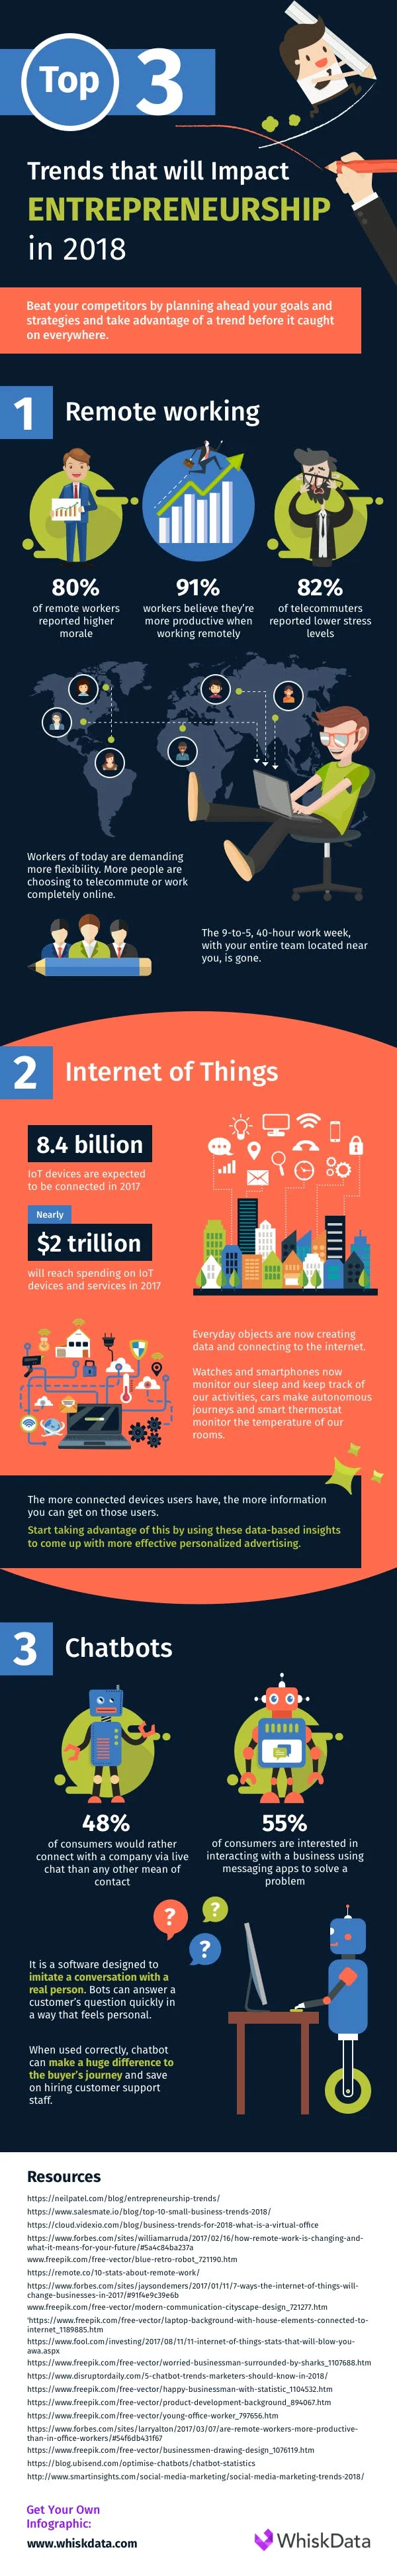 Top 3 Trends That Will Impact Entrepreneurship in 2018 - #infographic